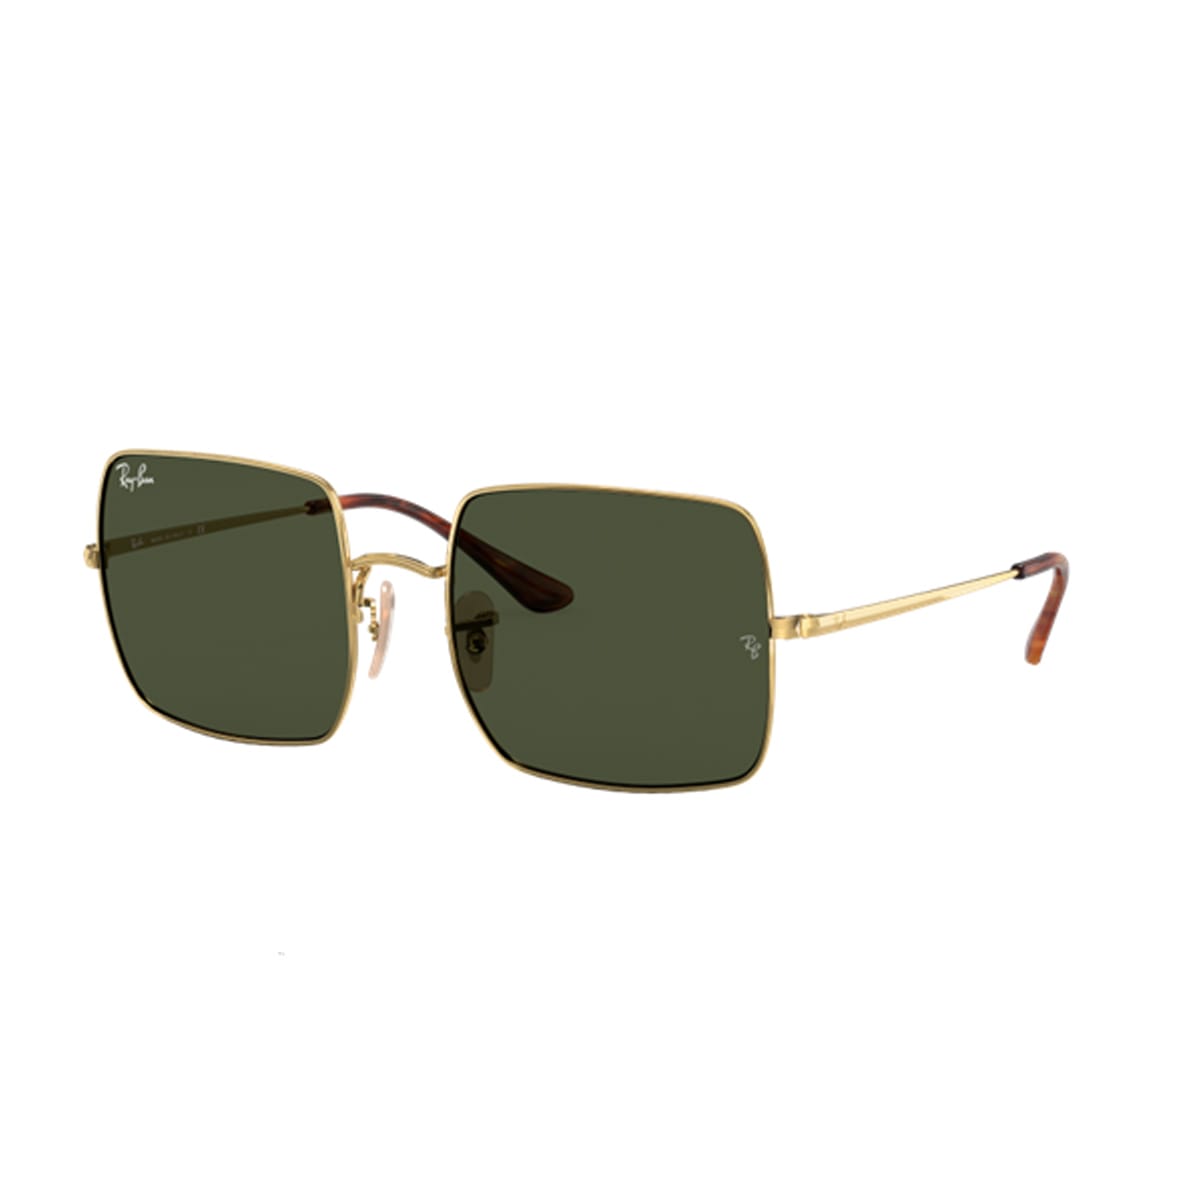 RAY BAN SQUARE RB1971 919631 SUNGLASSES